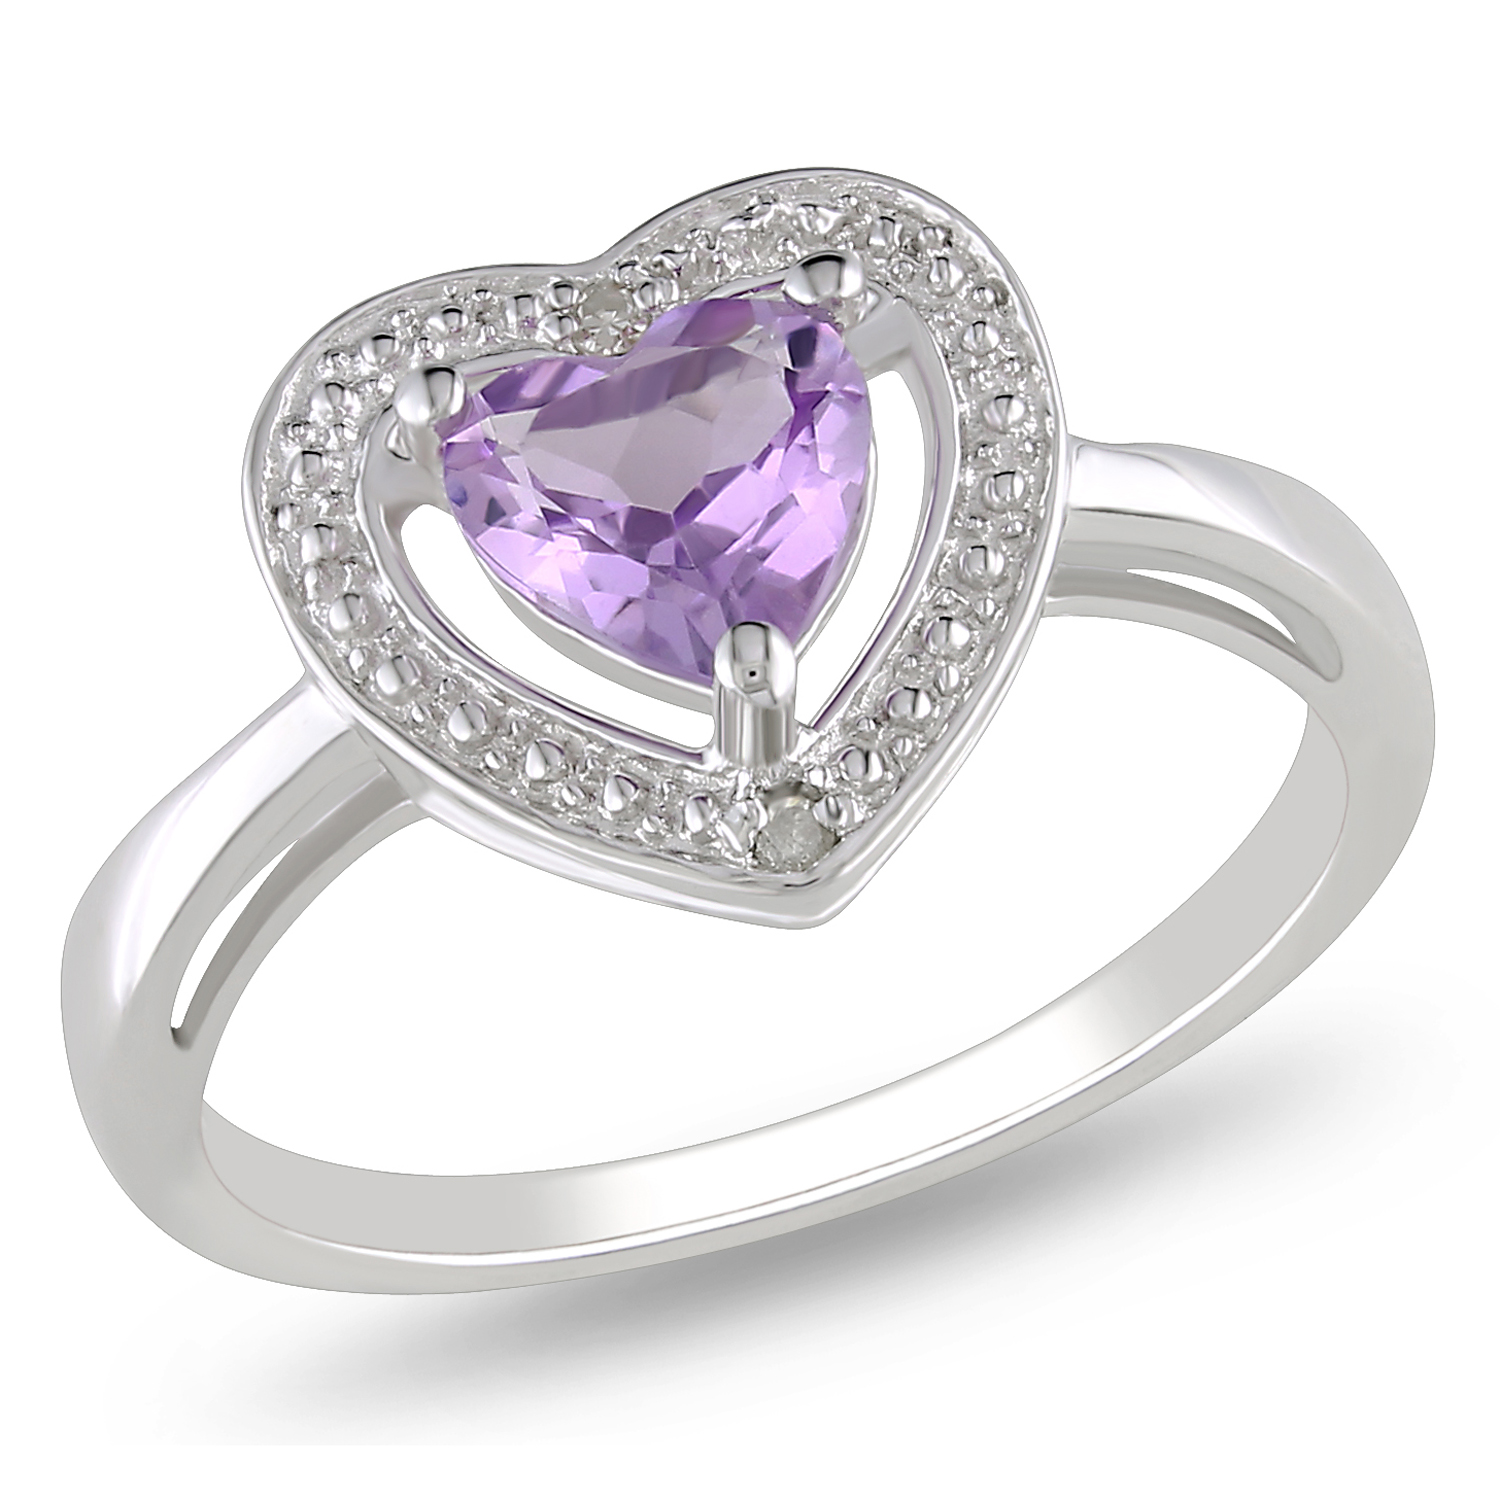 Amour 0.01 Carat T.W. Diamond and 3/5 Carat T.G.W. Amethyst Heart Ring in Sterling Silver GH I3